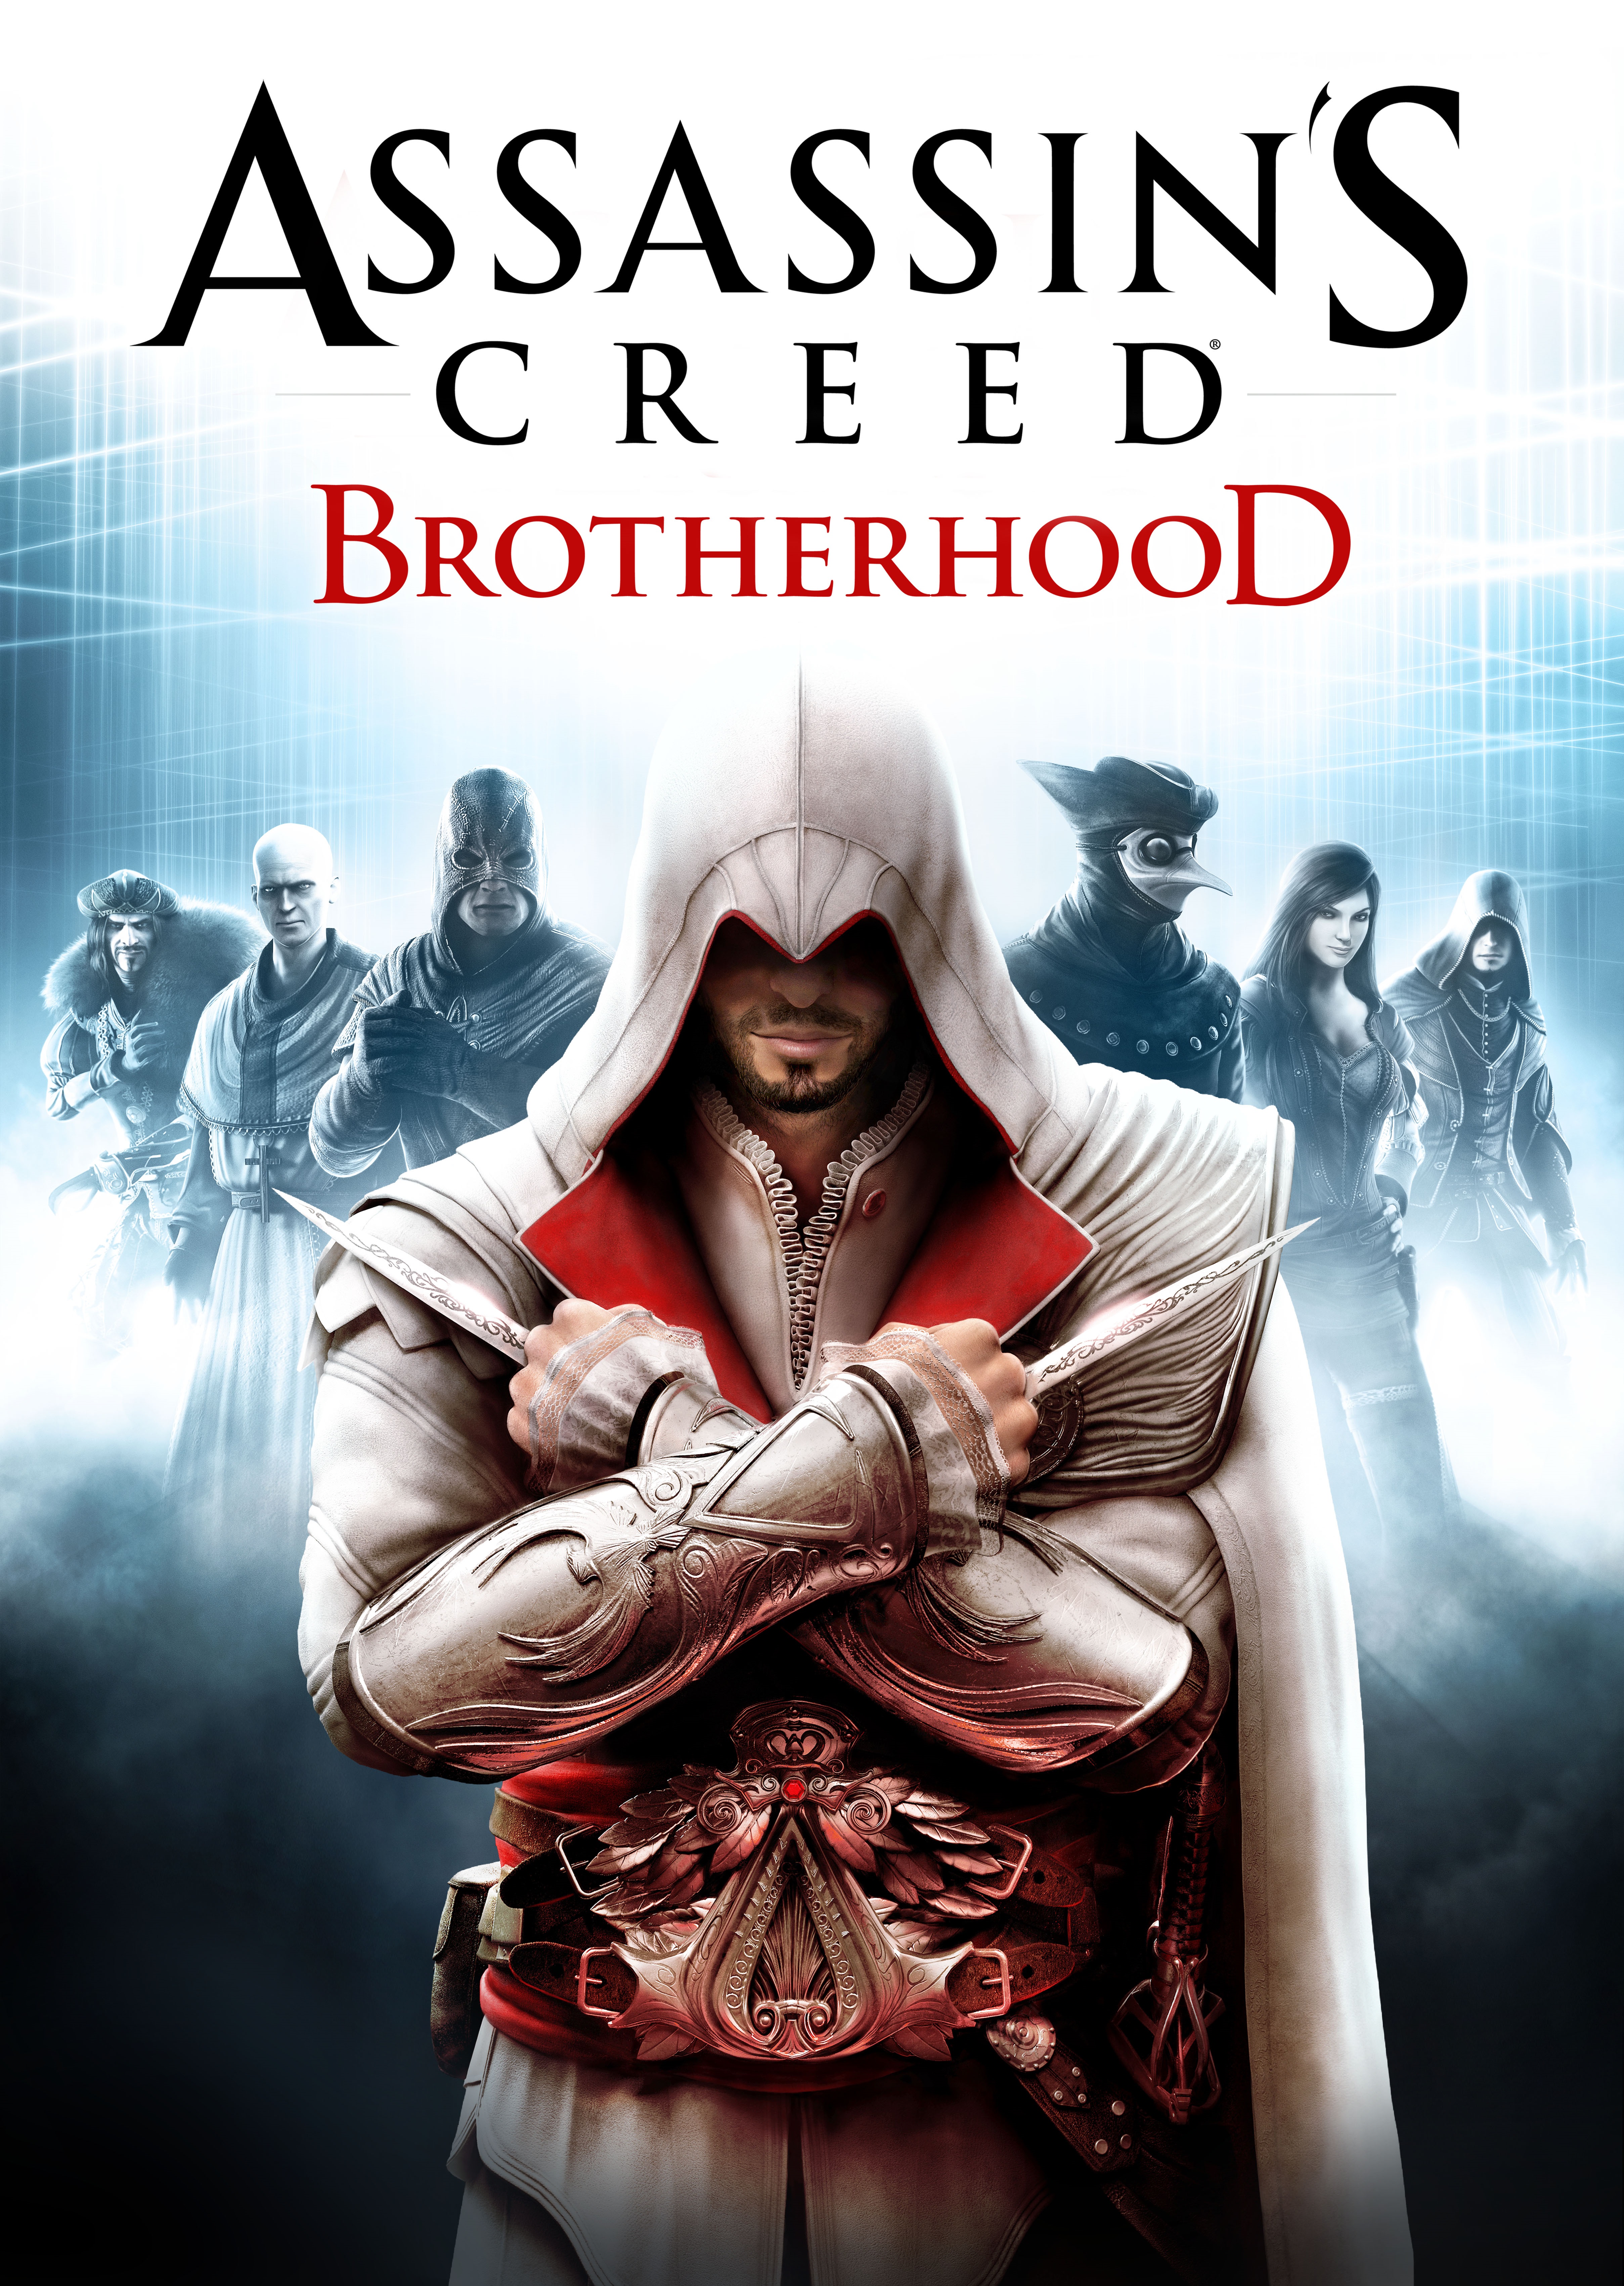 assassin creed brotherhood check if i have the deluxe edition